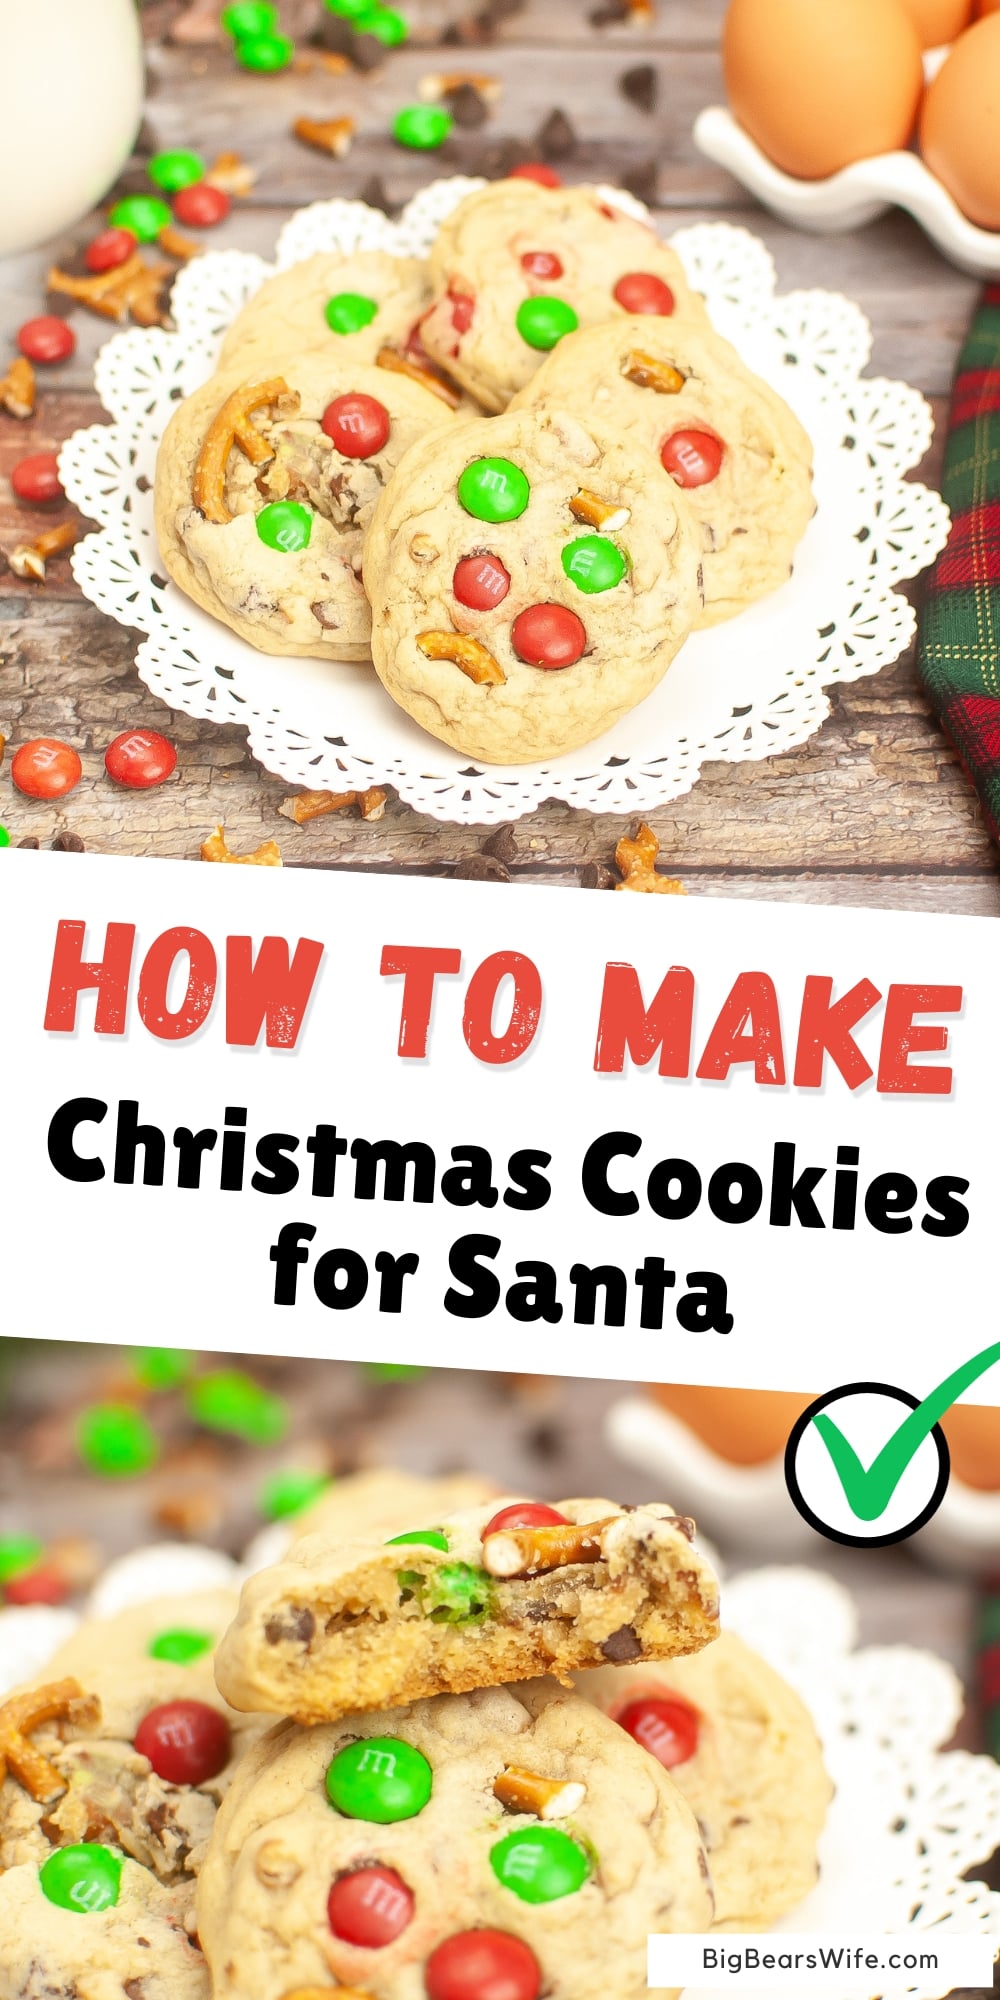 Want to make sure your Christmas cookies are up to Santa's standards? Follow these expert guidelines and tips to bake the perfect Christmas Cookies for Santa that will earn you extra points with Mr. Claus himself. via @bigbearswife